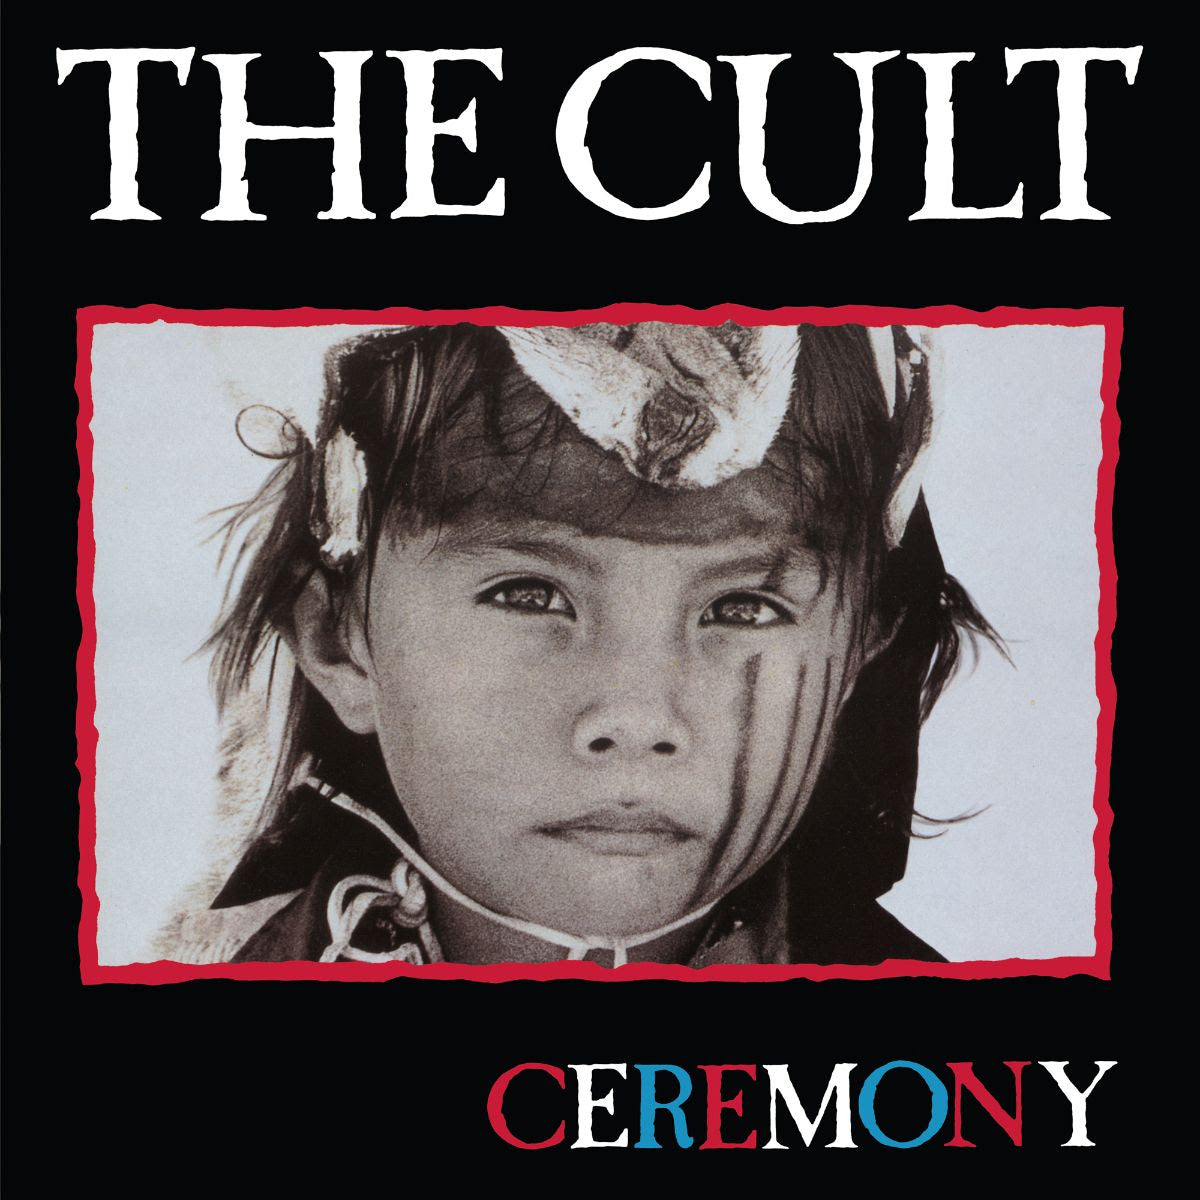 The Cult - Ceremony | Buy the Vinyl LP from Flying Nun Records